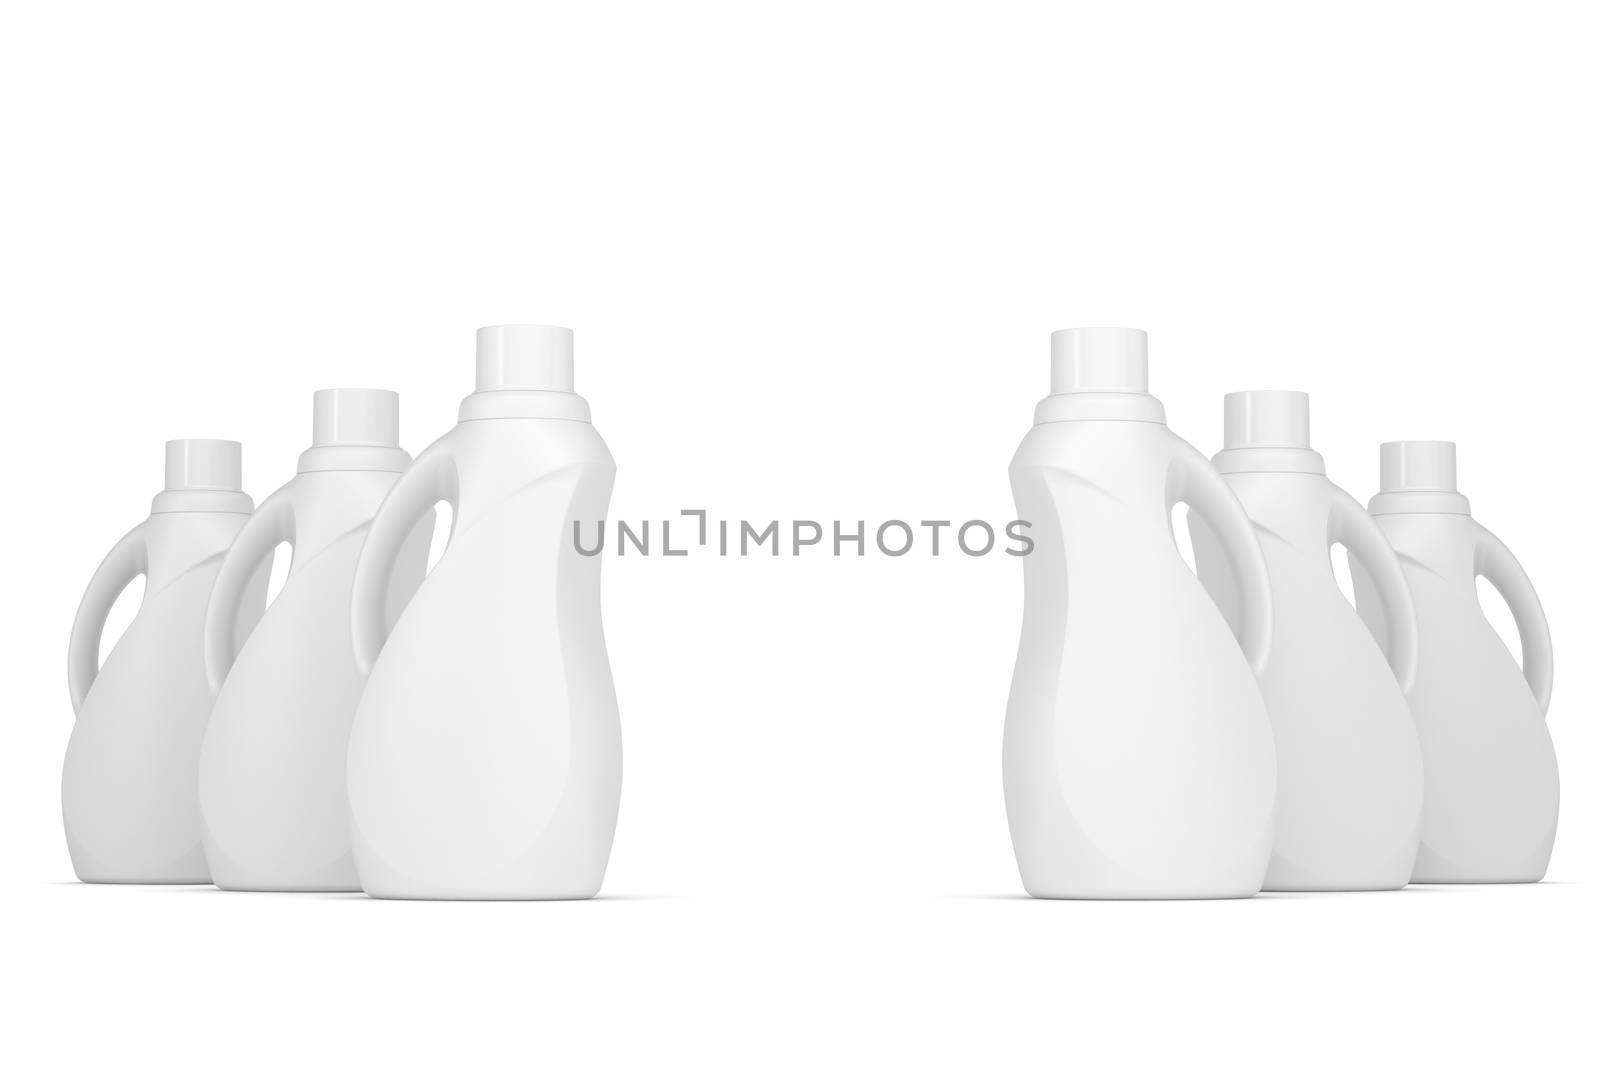 Series plastic bottles of household chemicals. 3d render isolated on white background